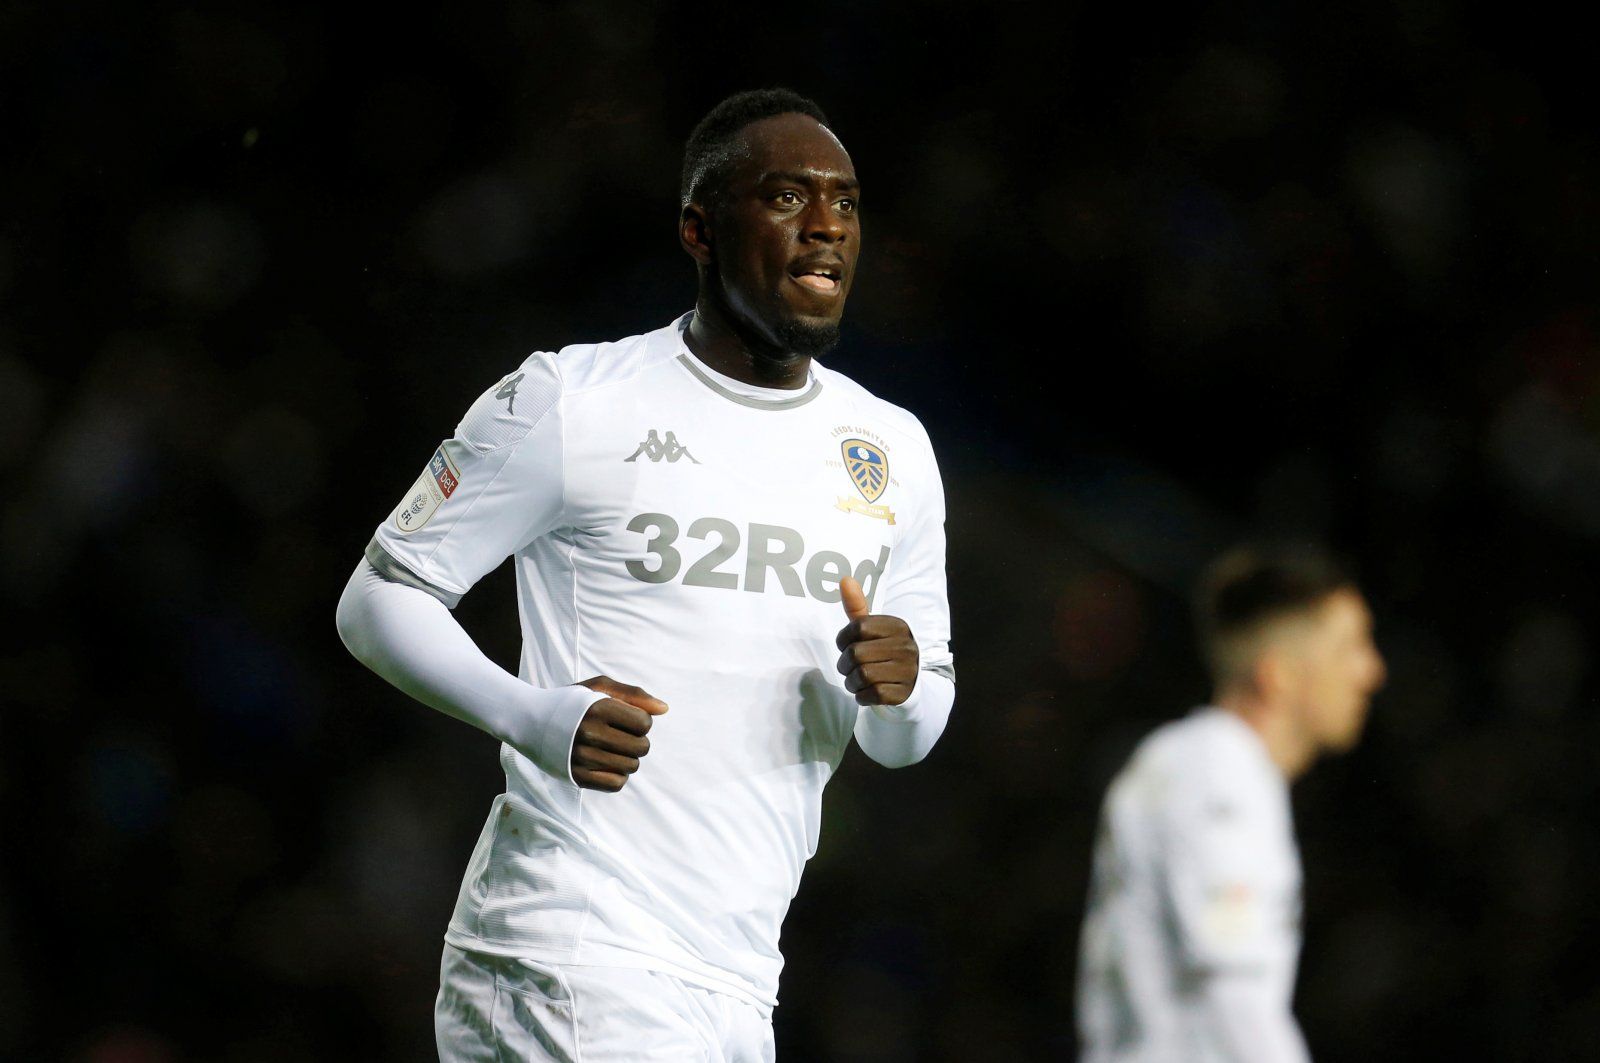 Leeds: Kieran Maguire reacts to Jean-Kevin Augustin update -Leeds United News